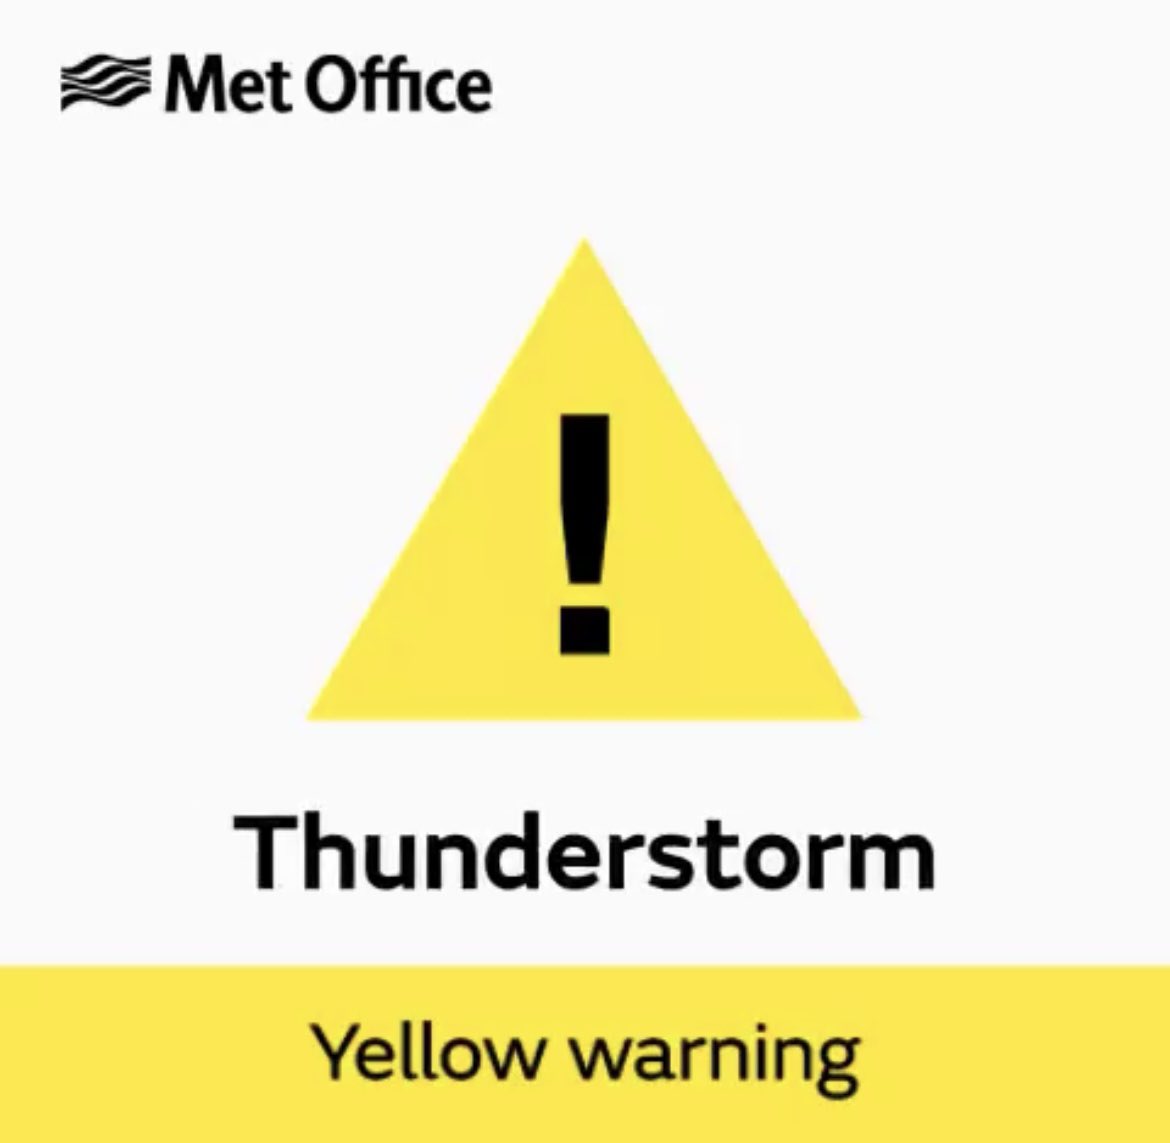 #Pitshanger #GBHighSt  residents @metoffice have reported heavy rain & #thunderstorms will affect southern Britain overnight & into Thursday morning
Rainfall amounts are uncertain & will vary greatly, even within counties, but some flooding is possible locally. #staysafe